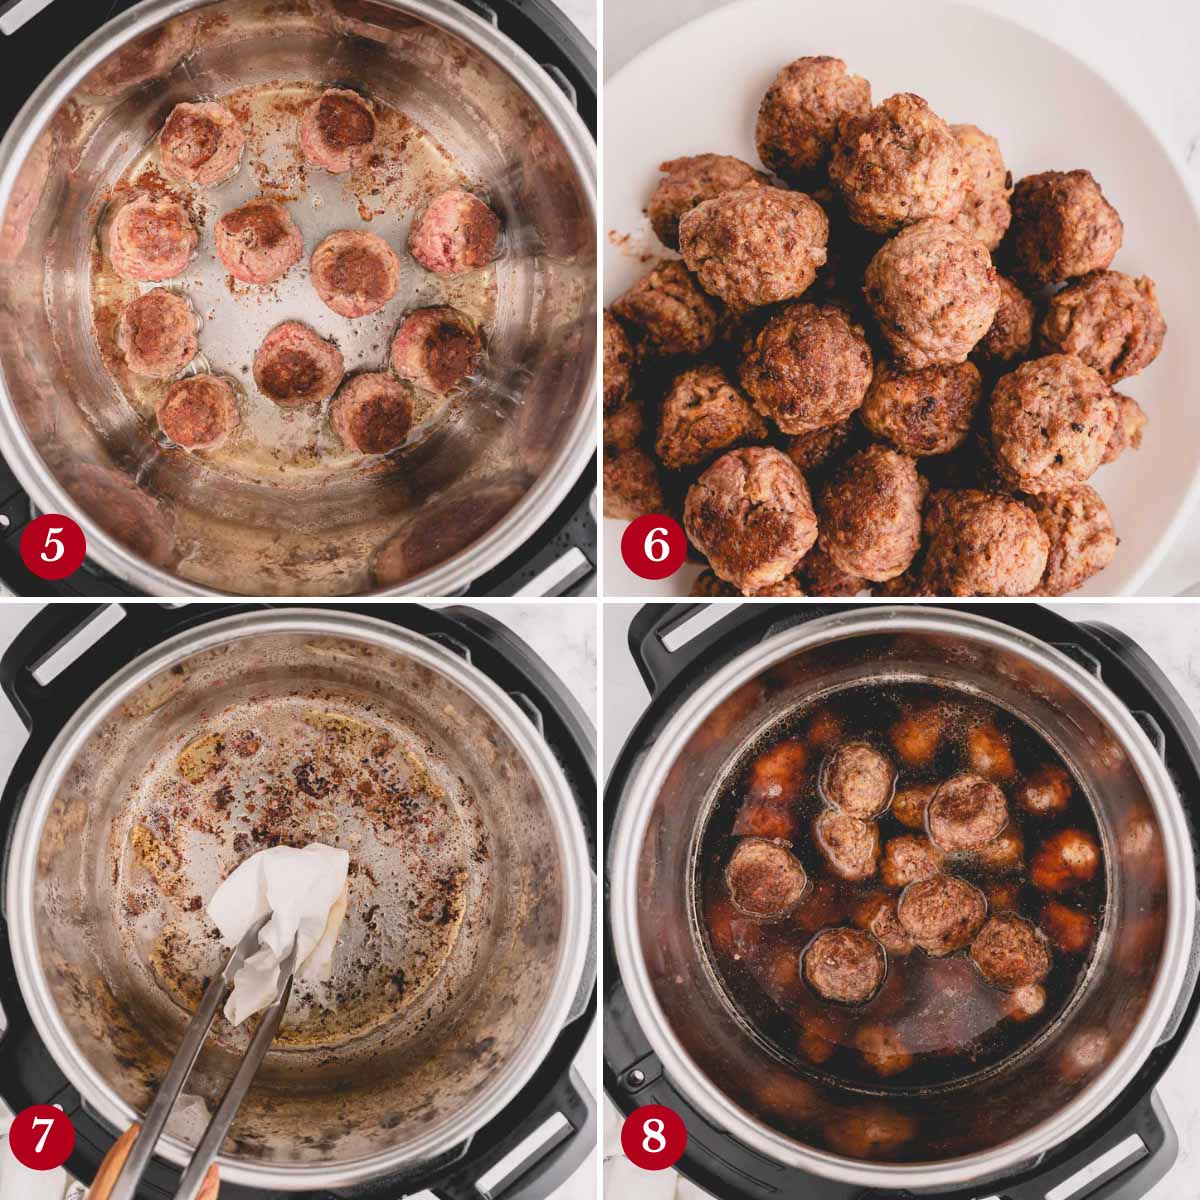 Step by step images of searing and cooking meatballs in Instant Pot.